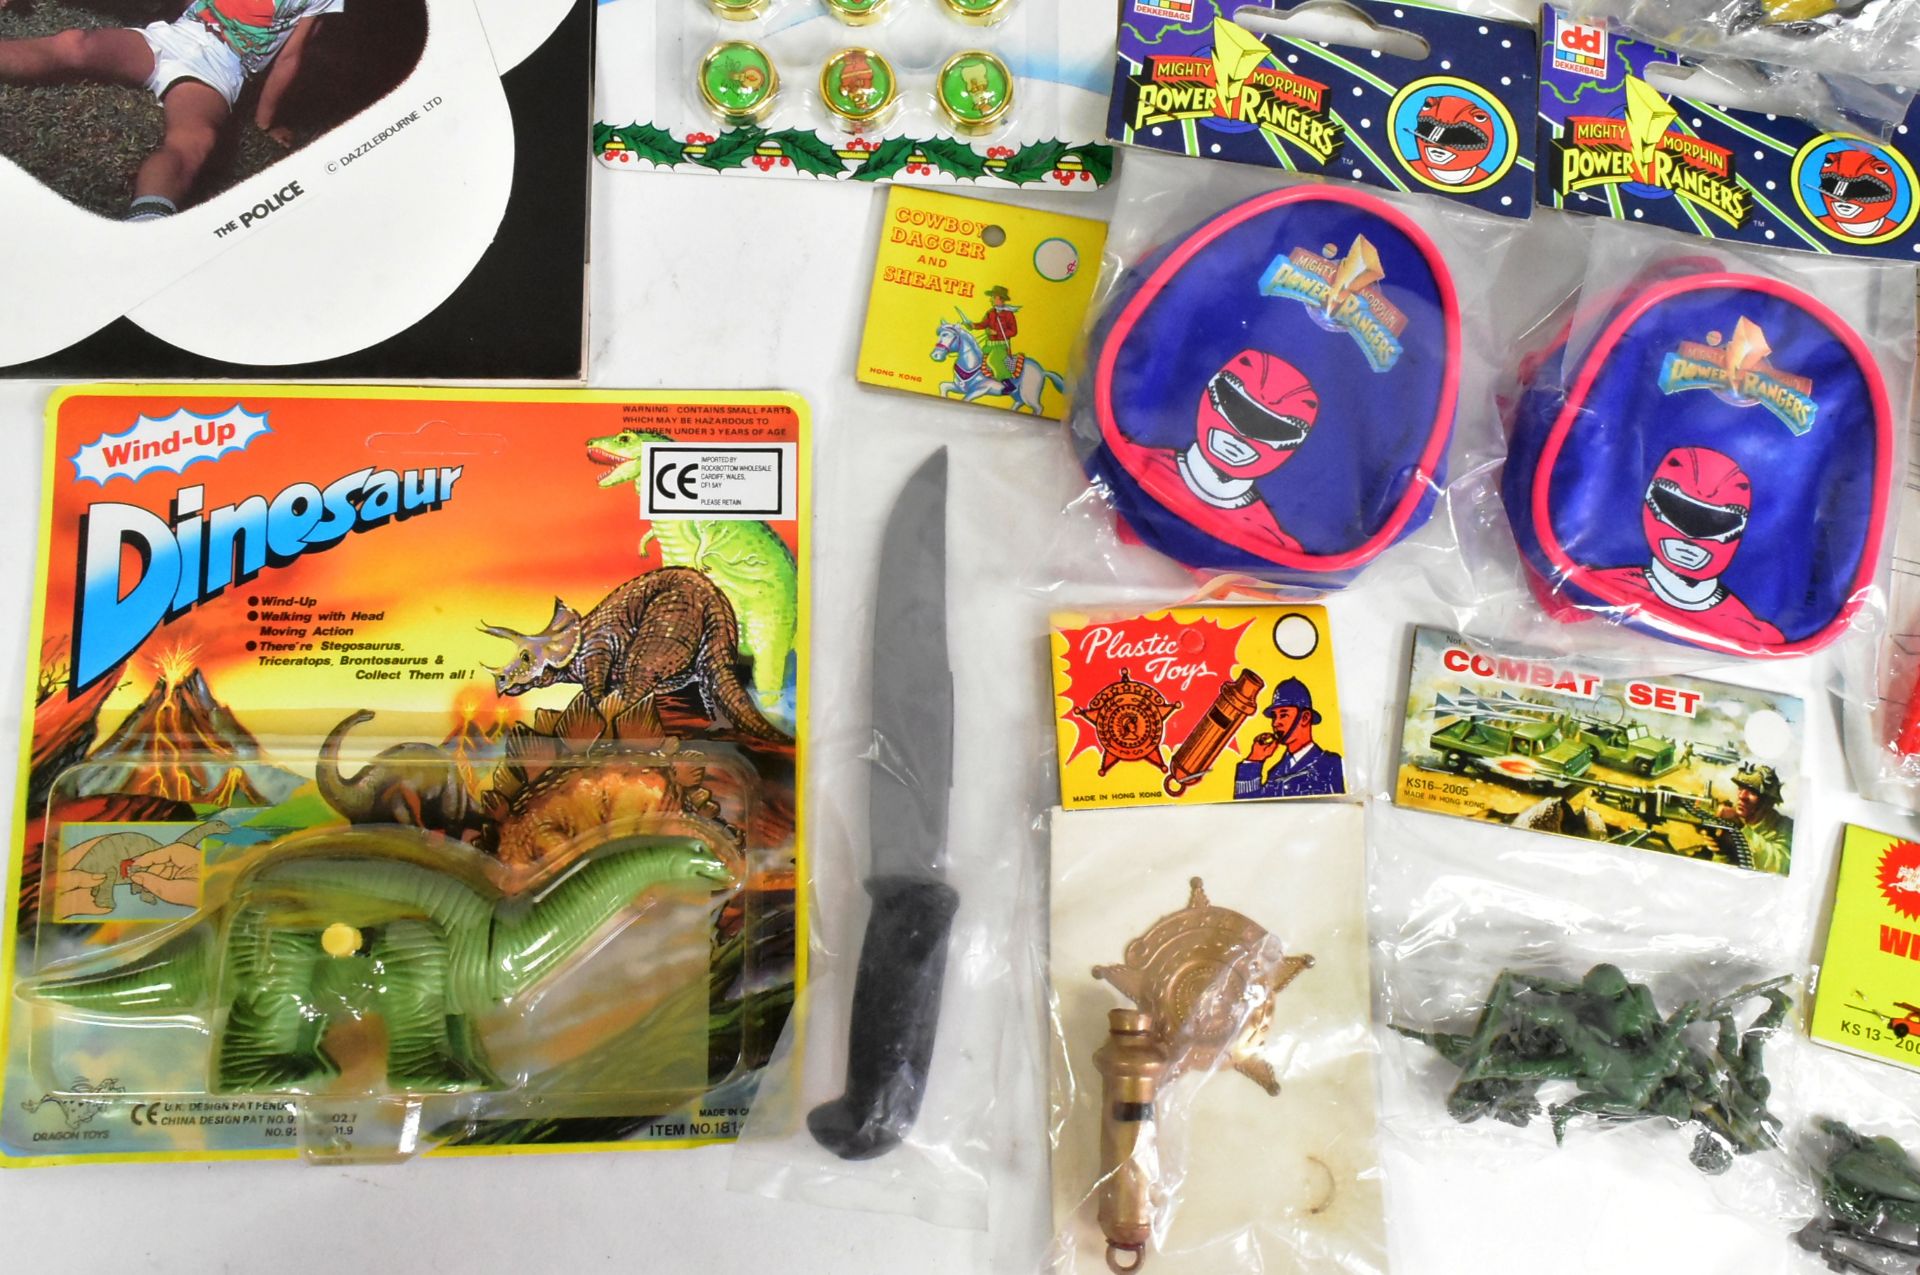 RACK PACK TOYS & NOVELTIES - COLLECTION OF ASSORTED ITEMS - Image 3 of 5